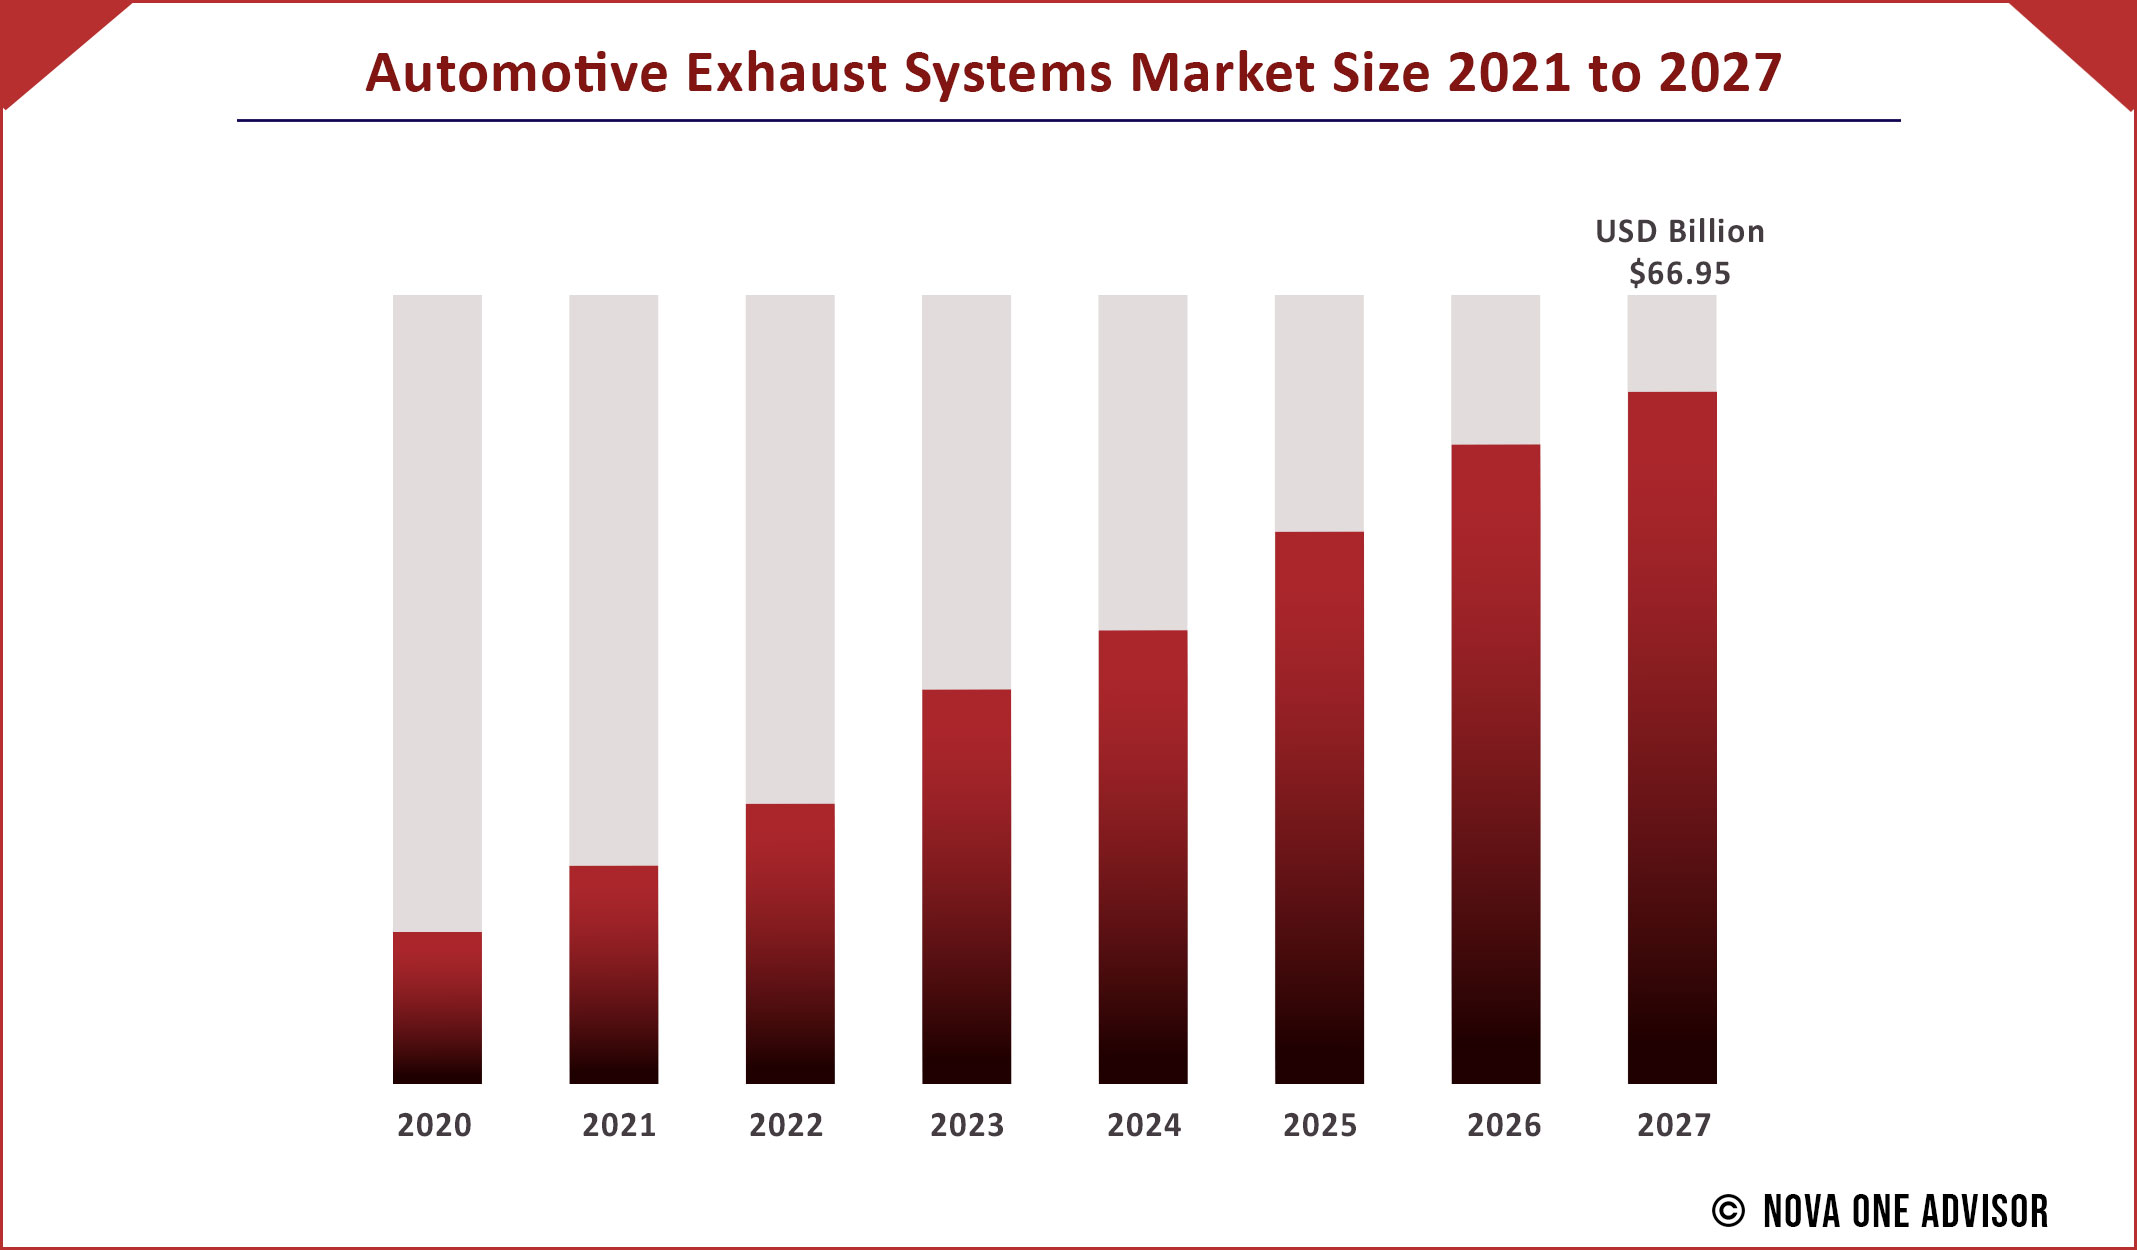 Automotive Exhaust Systems Market Size 2021 to 2027